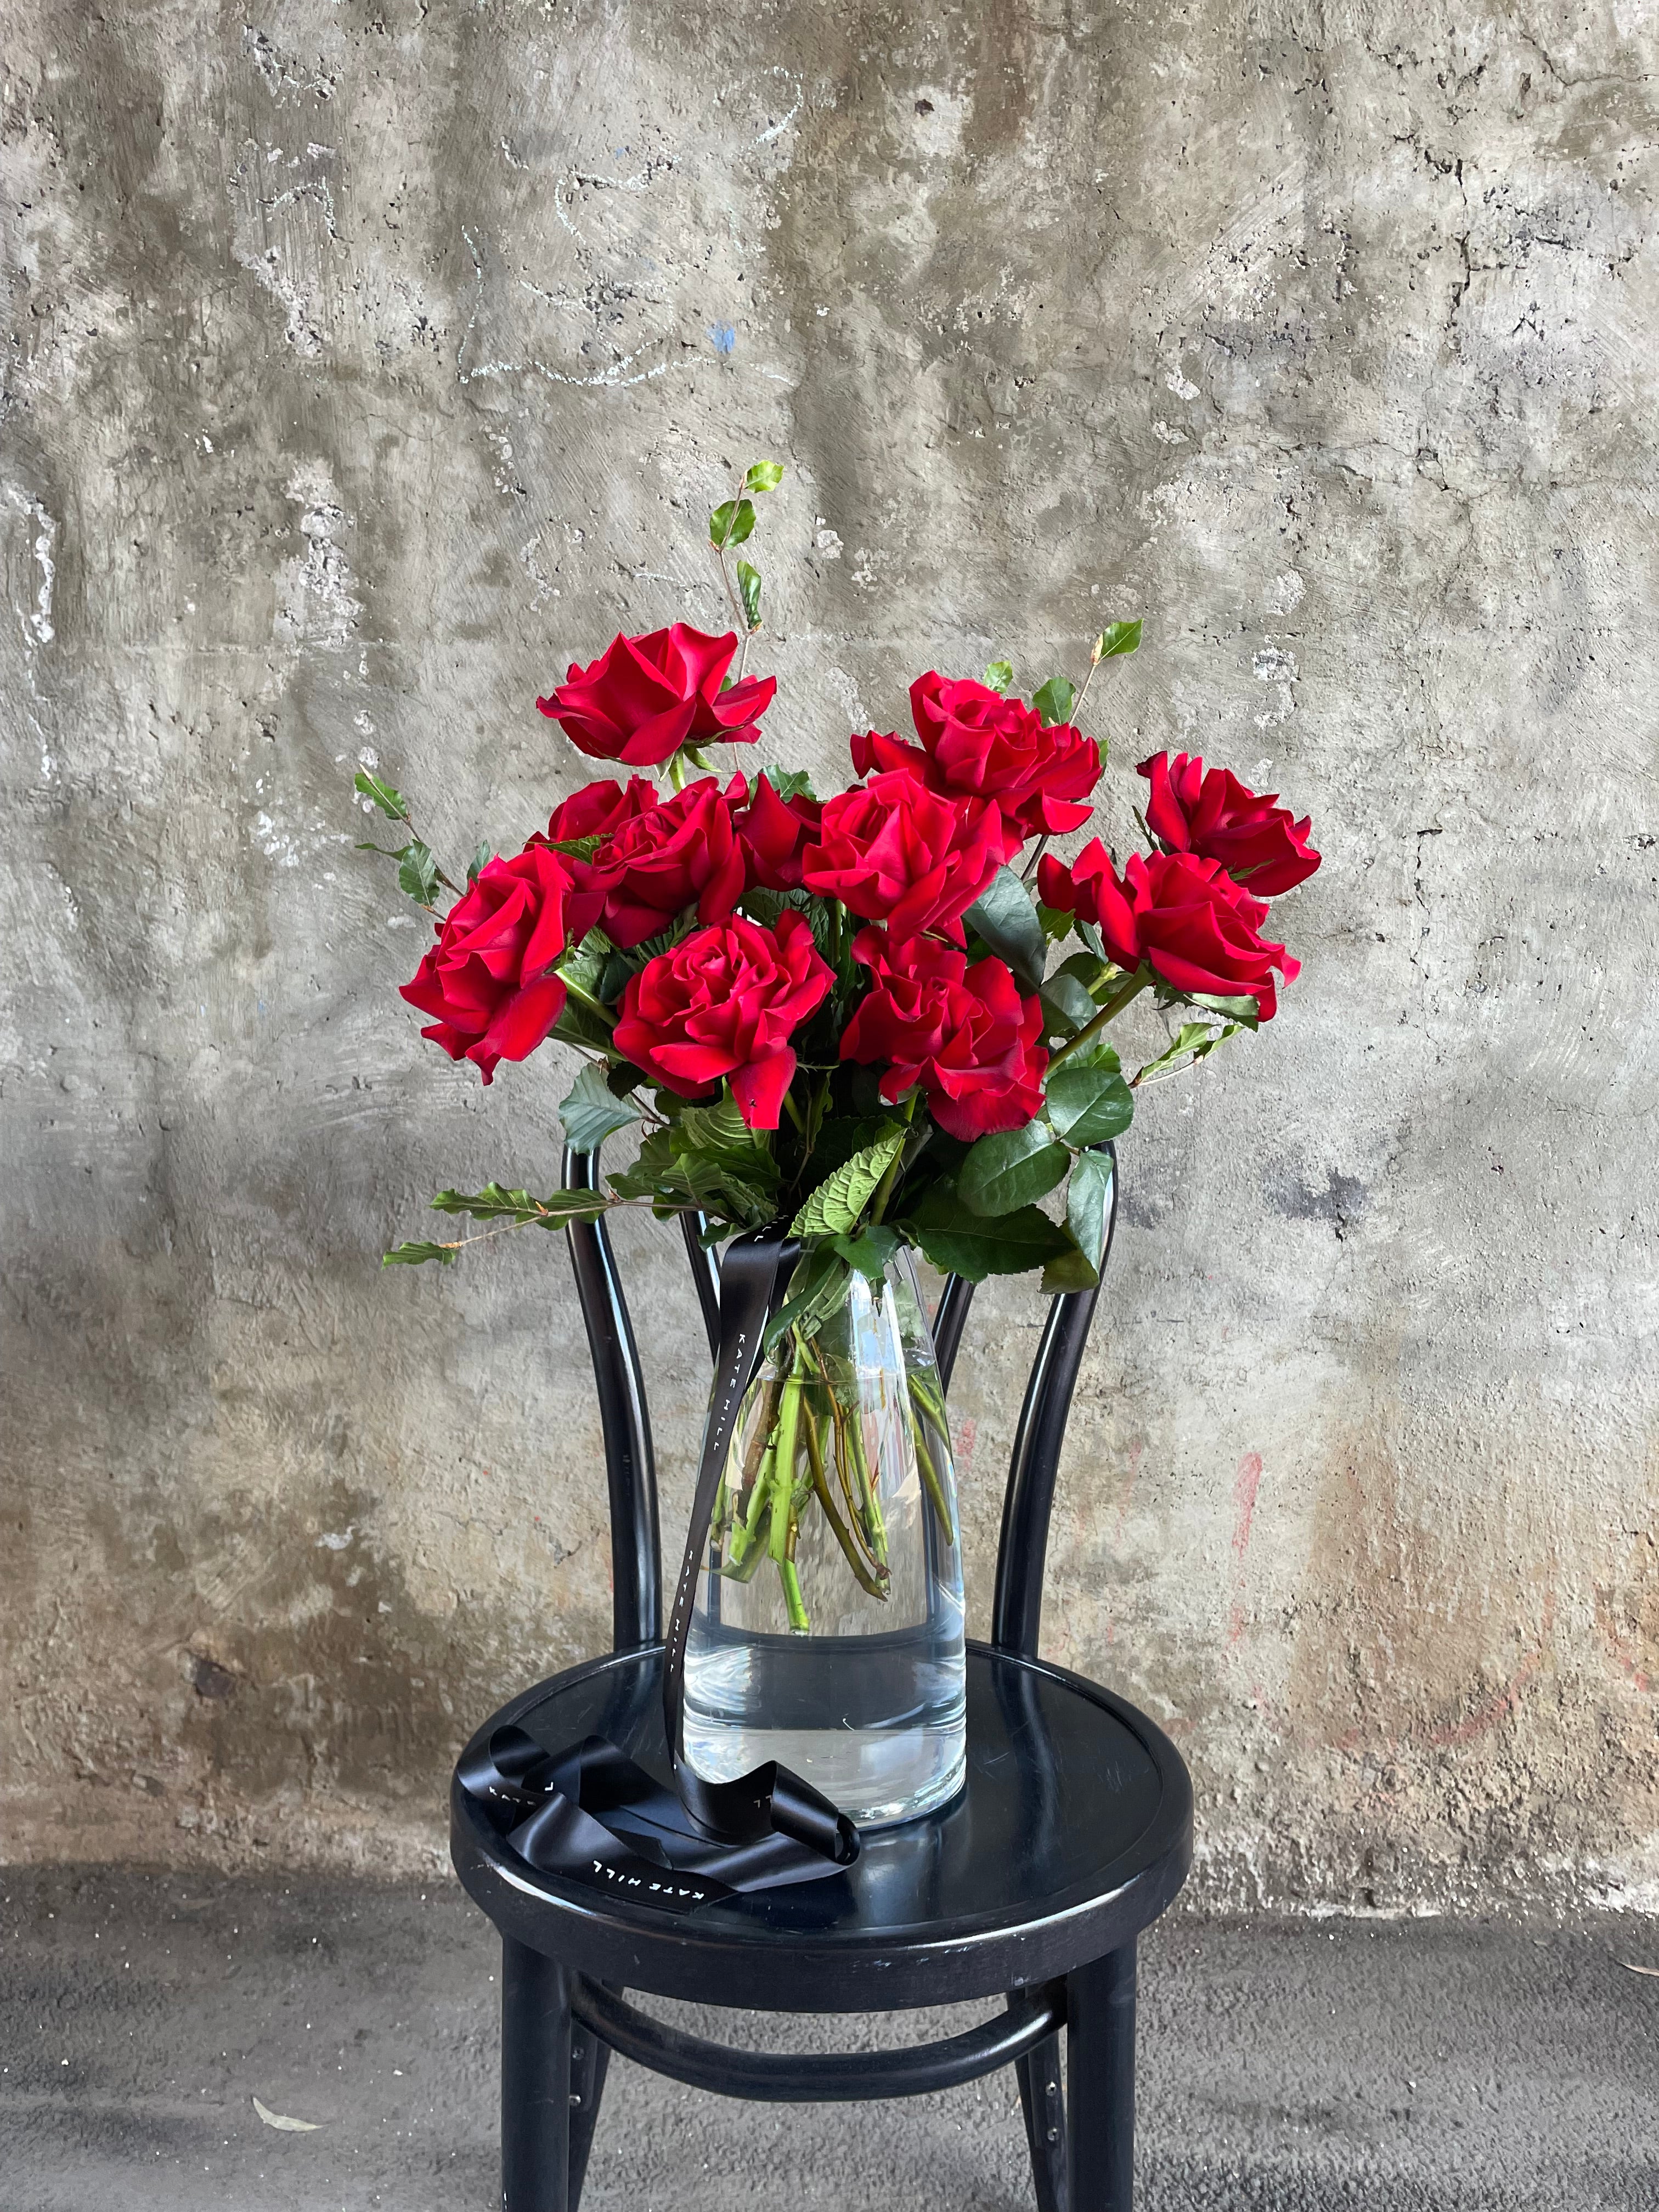 Clear glass vase featuring 10 stems of red roses, sitting on a black bentwood chair in front of a concrete wall.